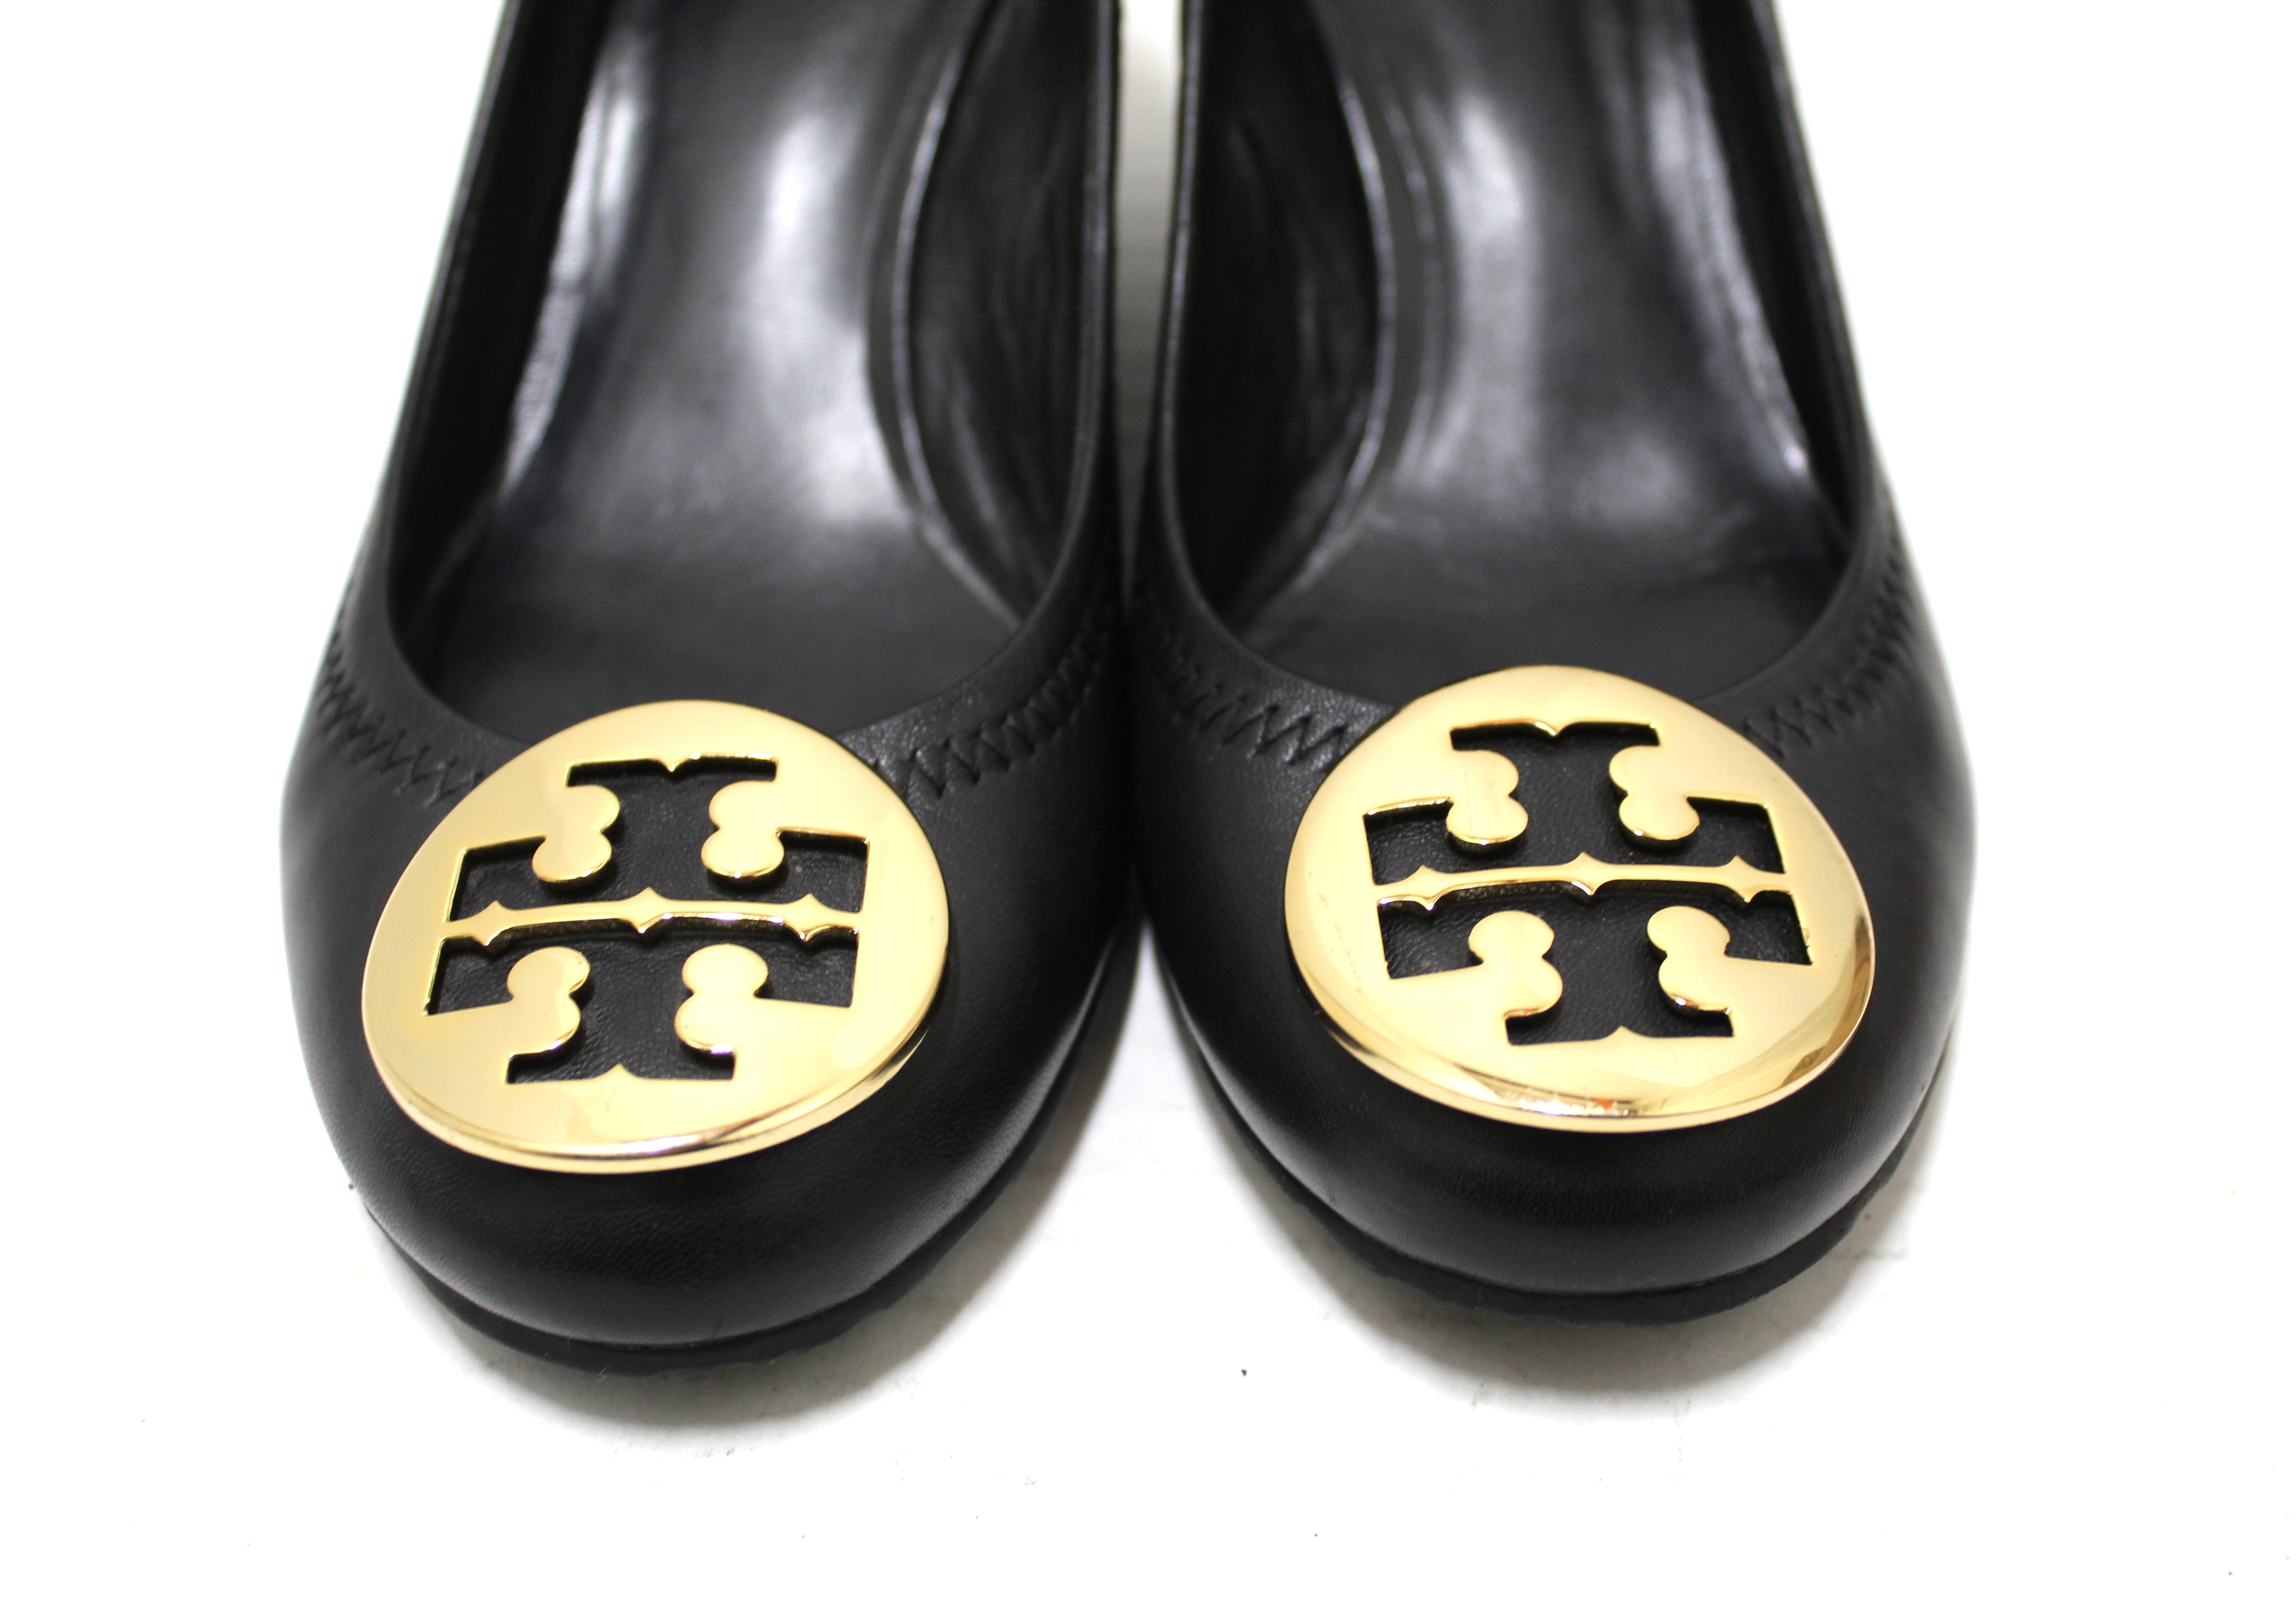 Authentic Tory Burch Black Leather Sally Wedge Size 6 – Paris Station Shop